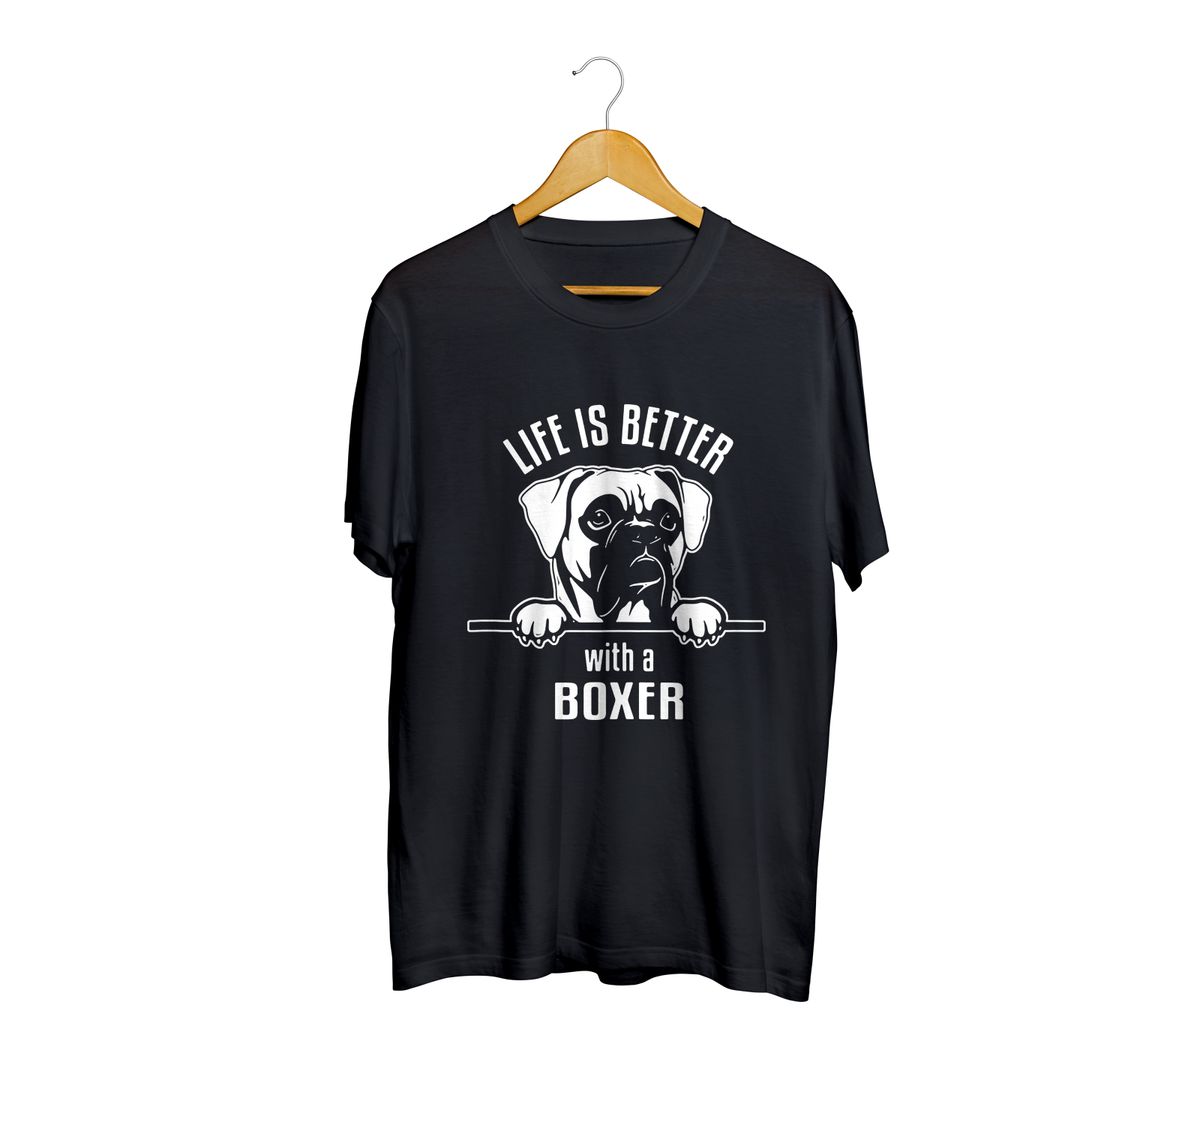 Fan Made Fits Boxer Black Exclusive T-Shirt image 1